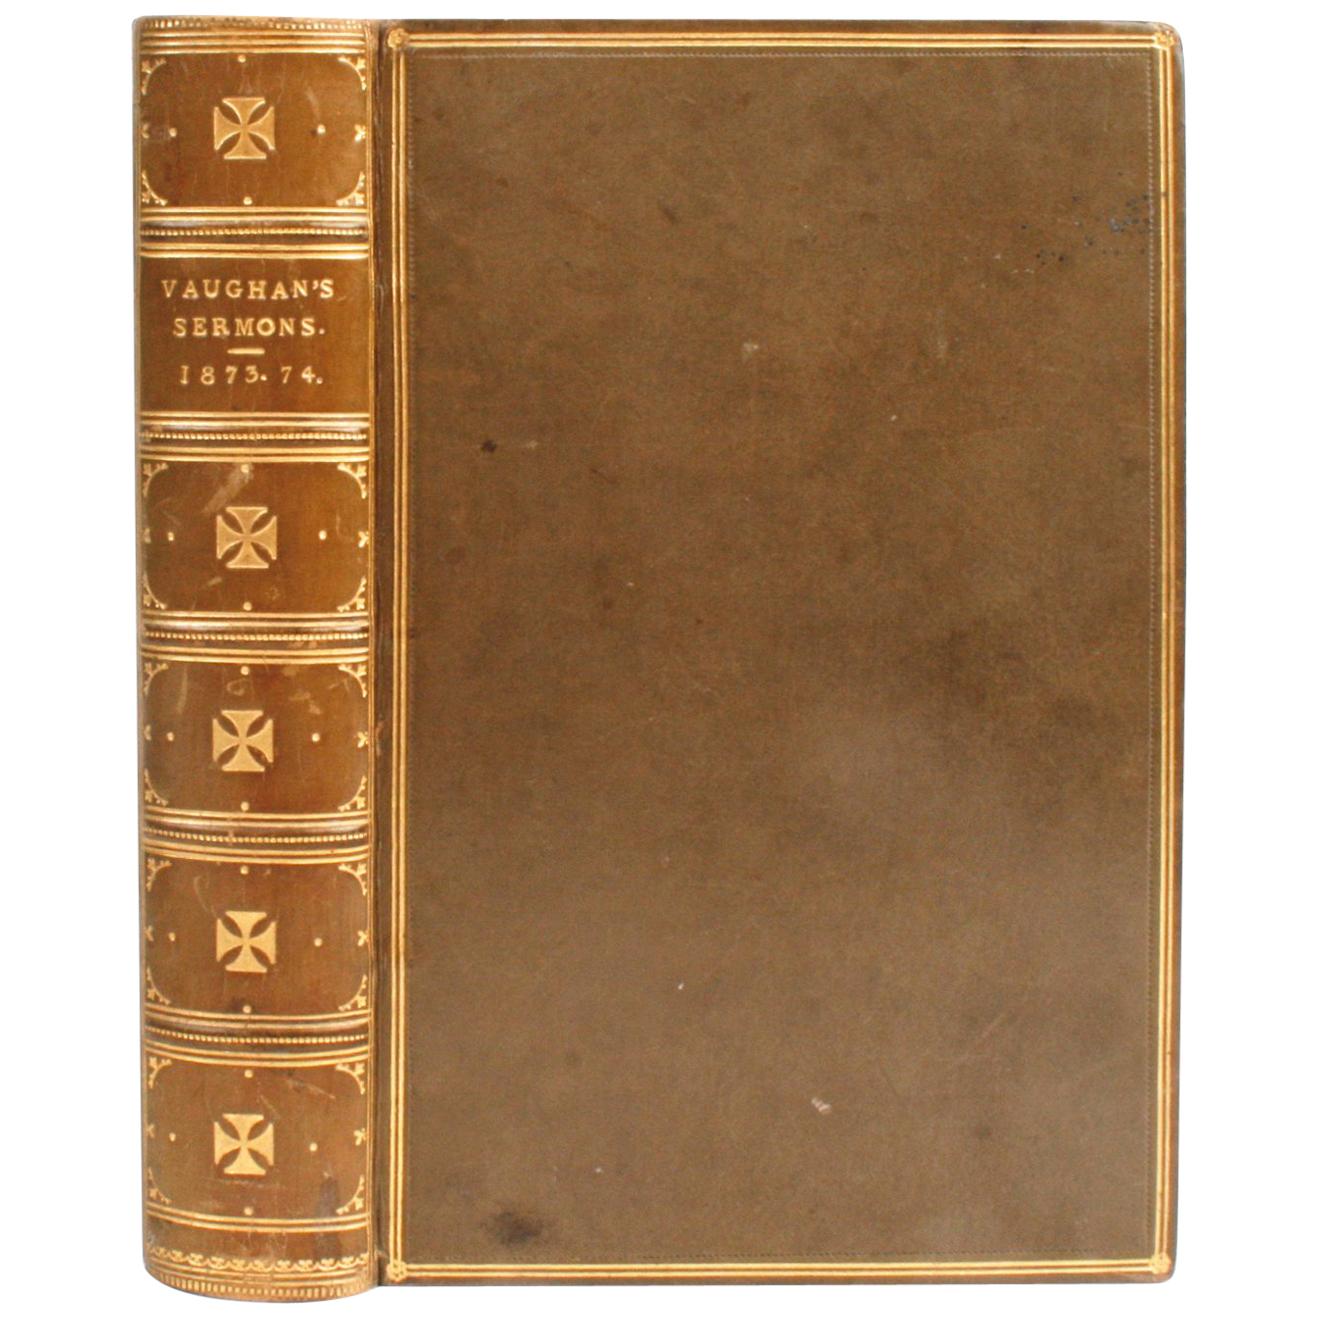 Vaughan's Sermons, 1873-1874 For Sale